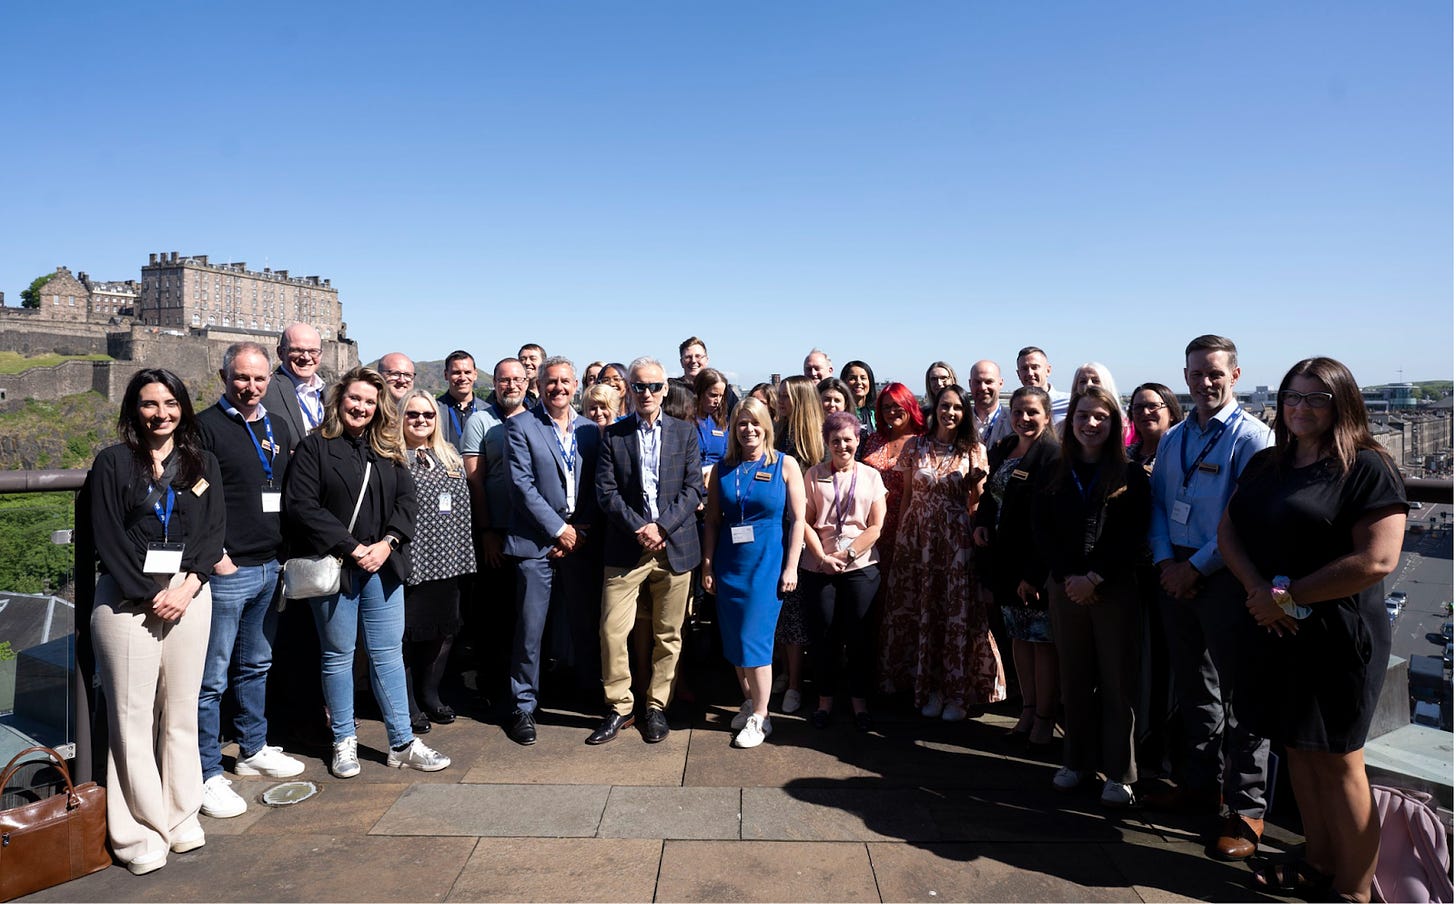 The photo is of the attendees of the Scottish Financial Enterprise Summit standing outside with a view of a blue sky in the background